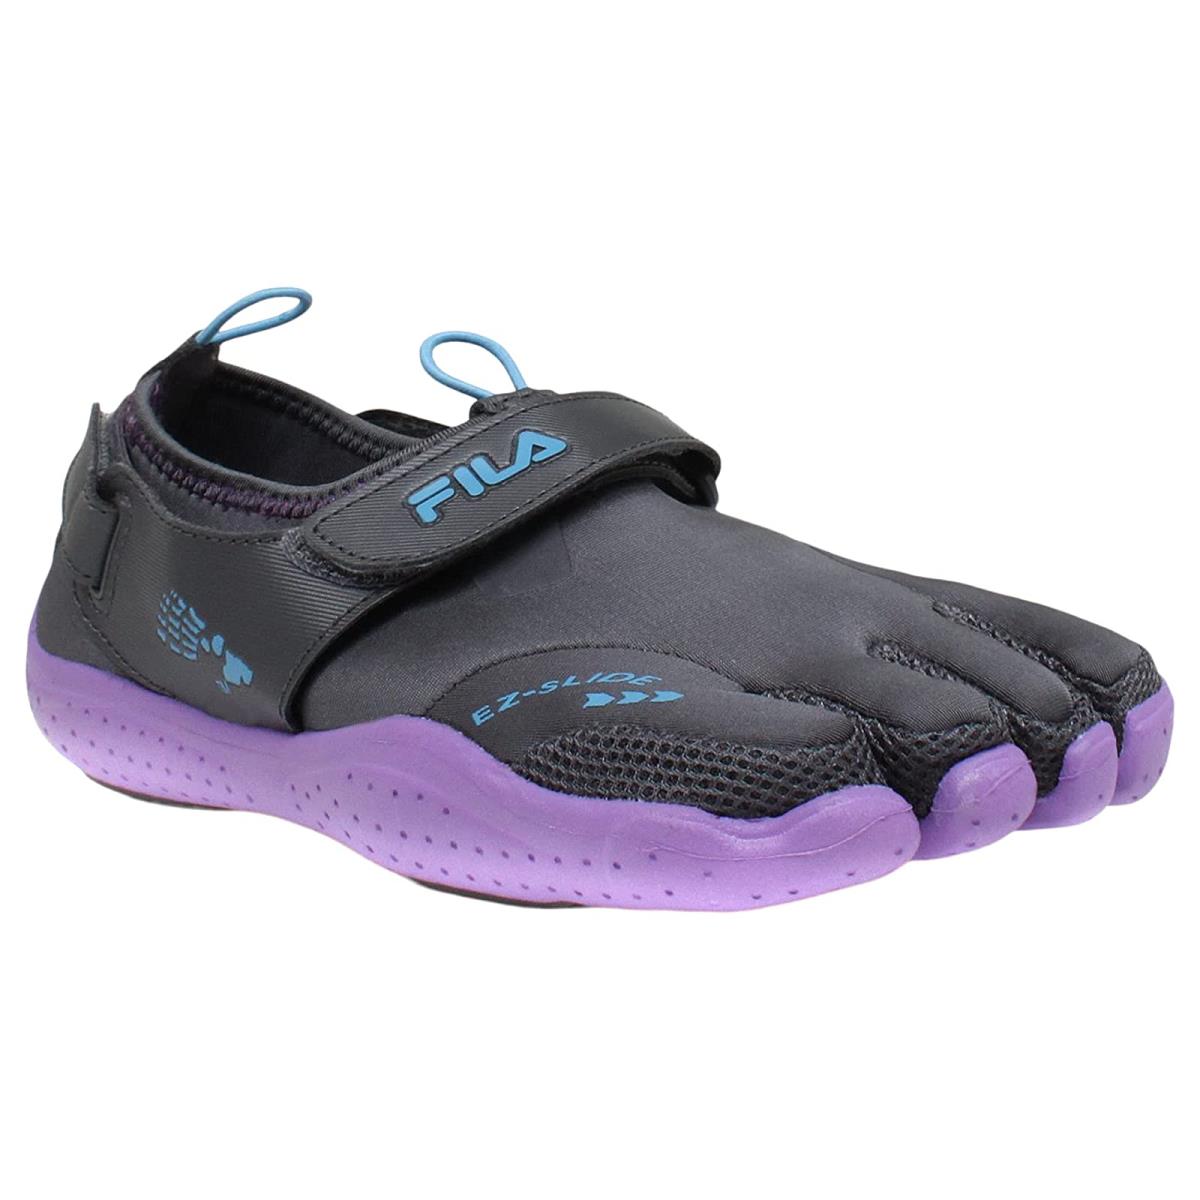 Woman`s Sneakers Athletic Shoes Fila Skele-toes EZ Slide Drainage Pewter/Kaleidoscope/Ethereal Blue